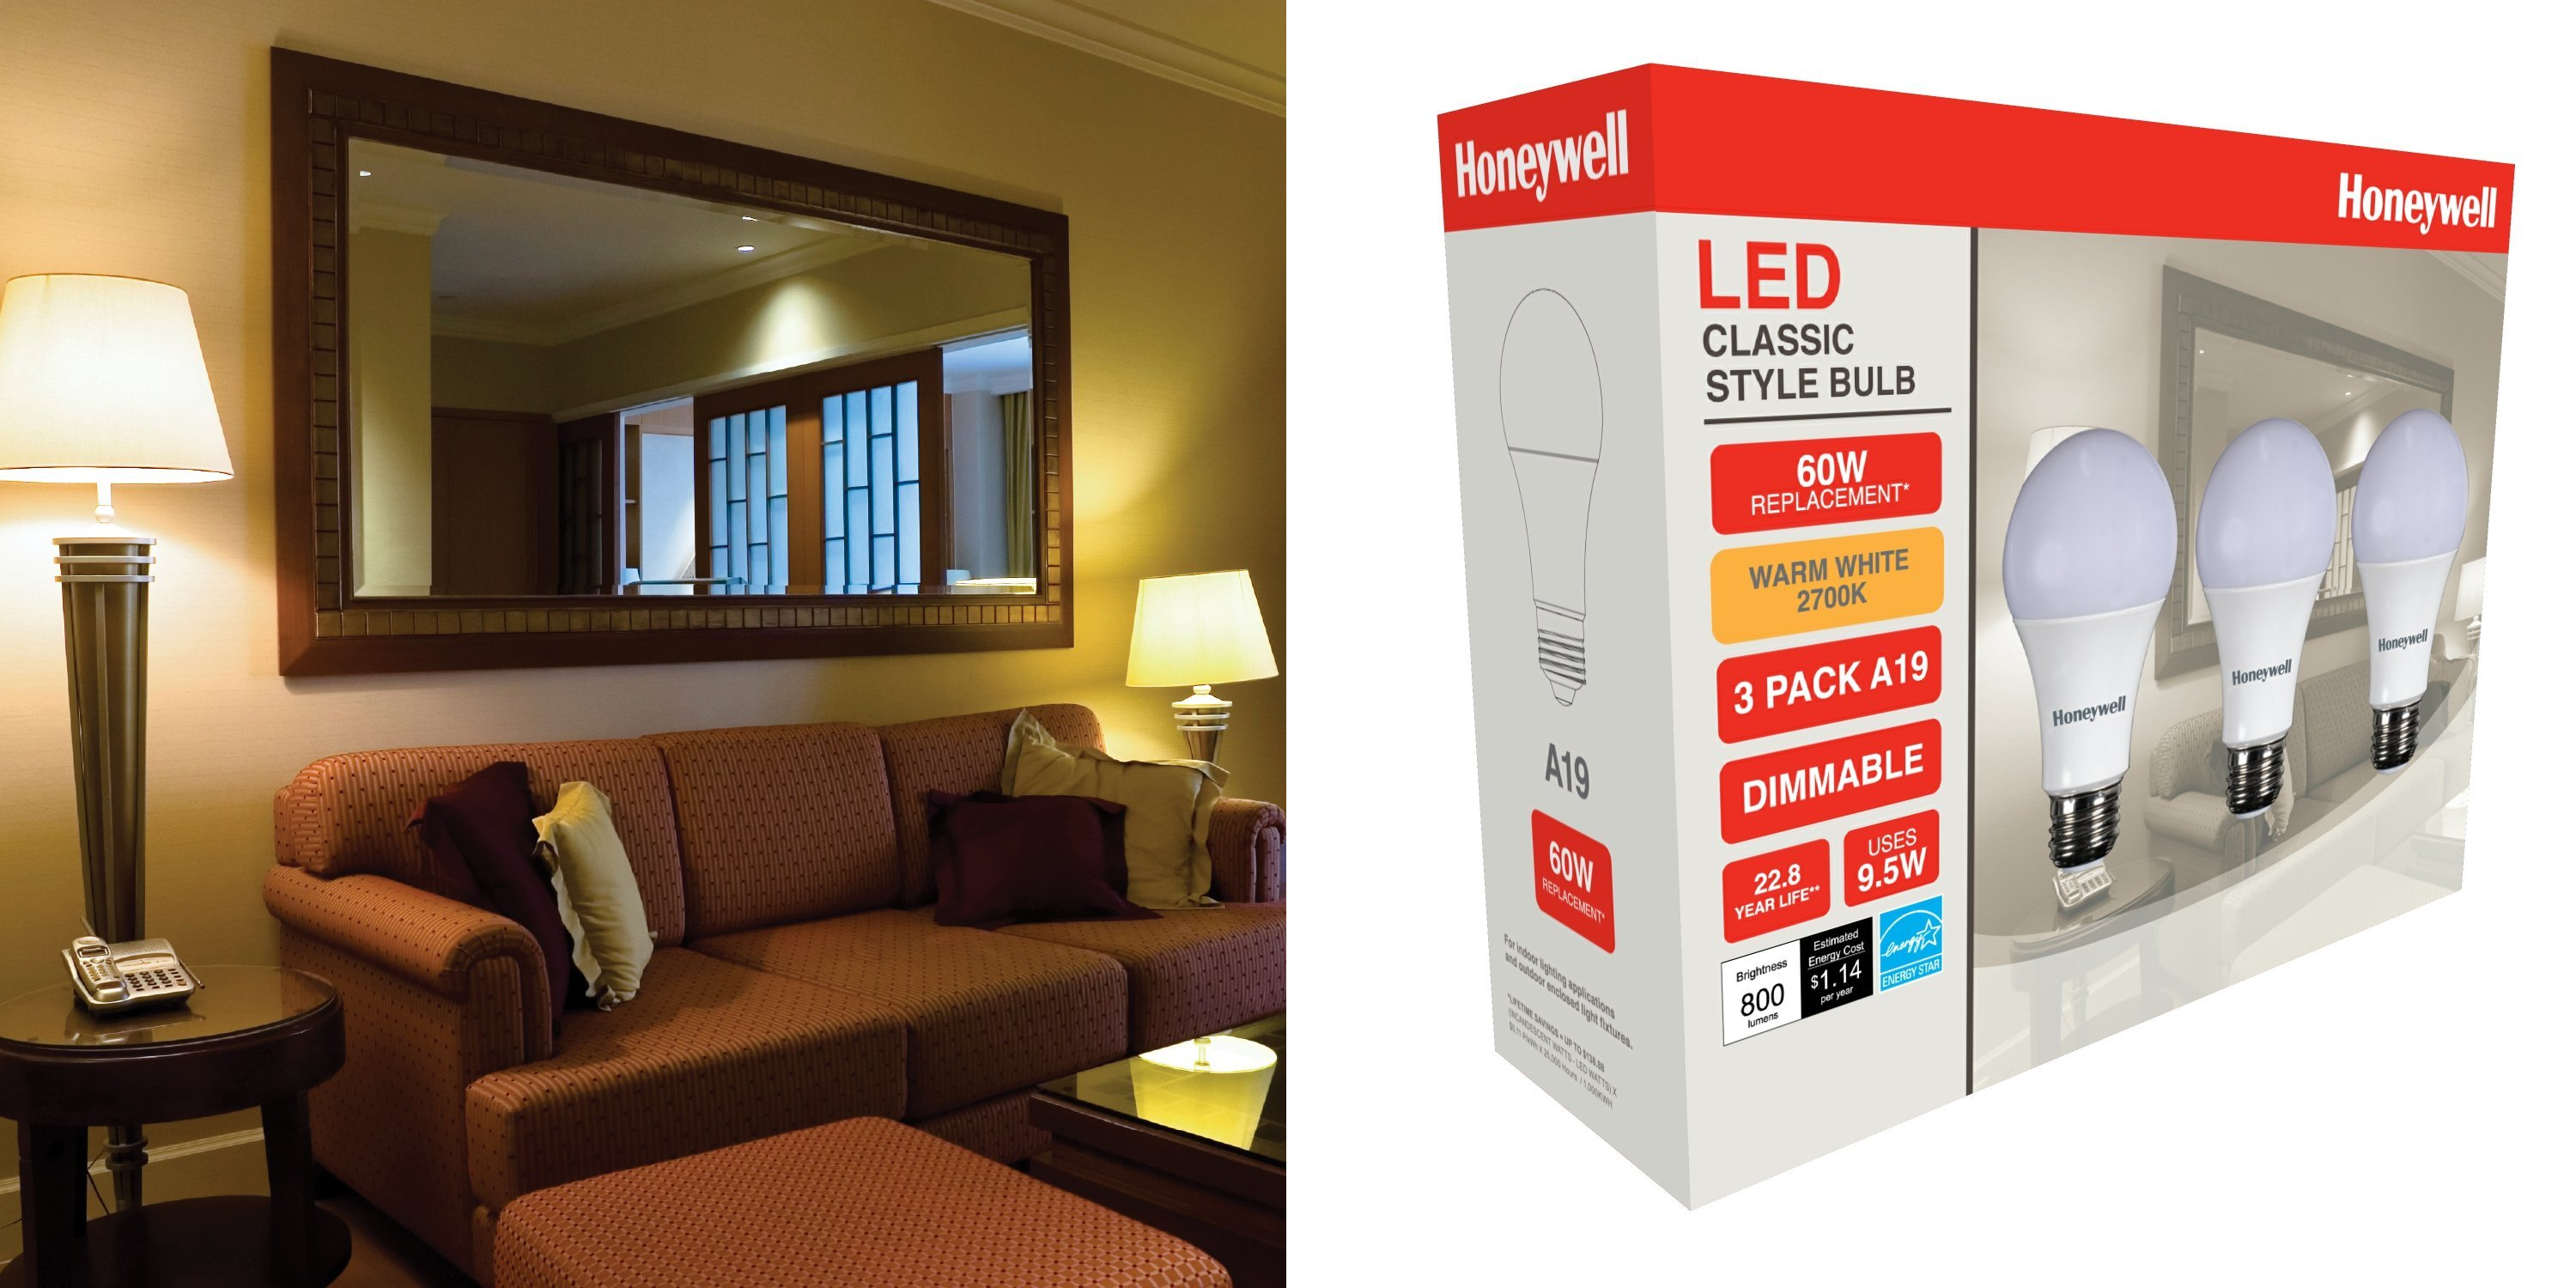 Honeywell LED Dimmable Bulbs, 3-pack Just $3.29!!